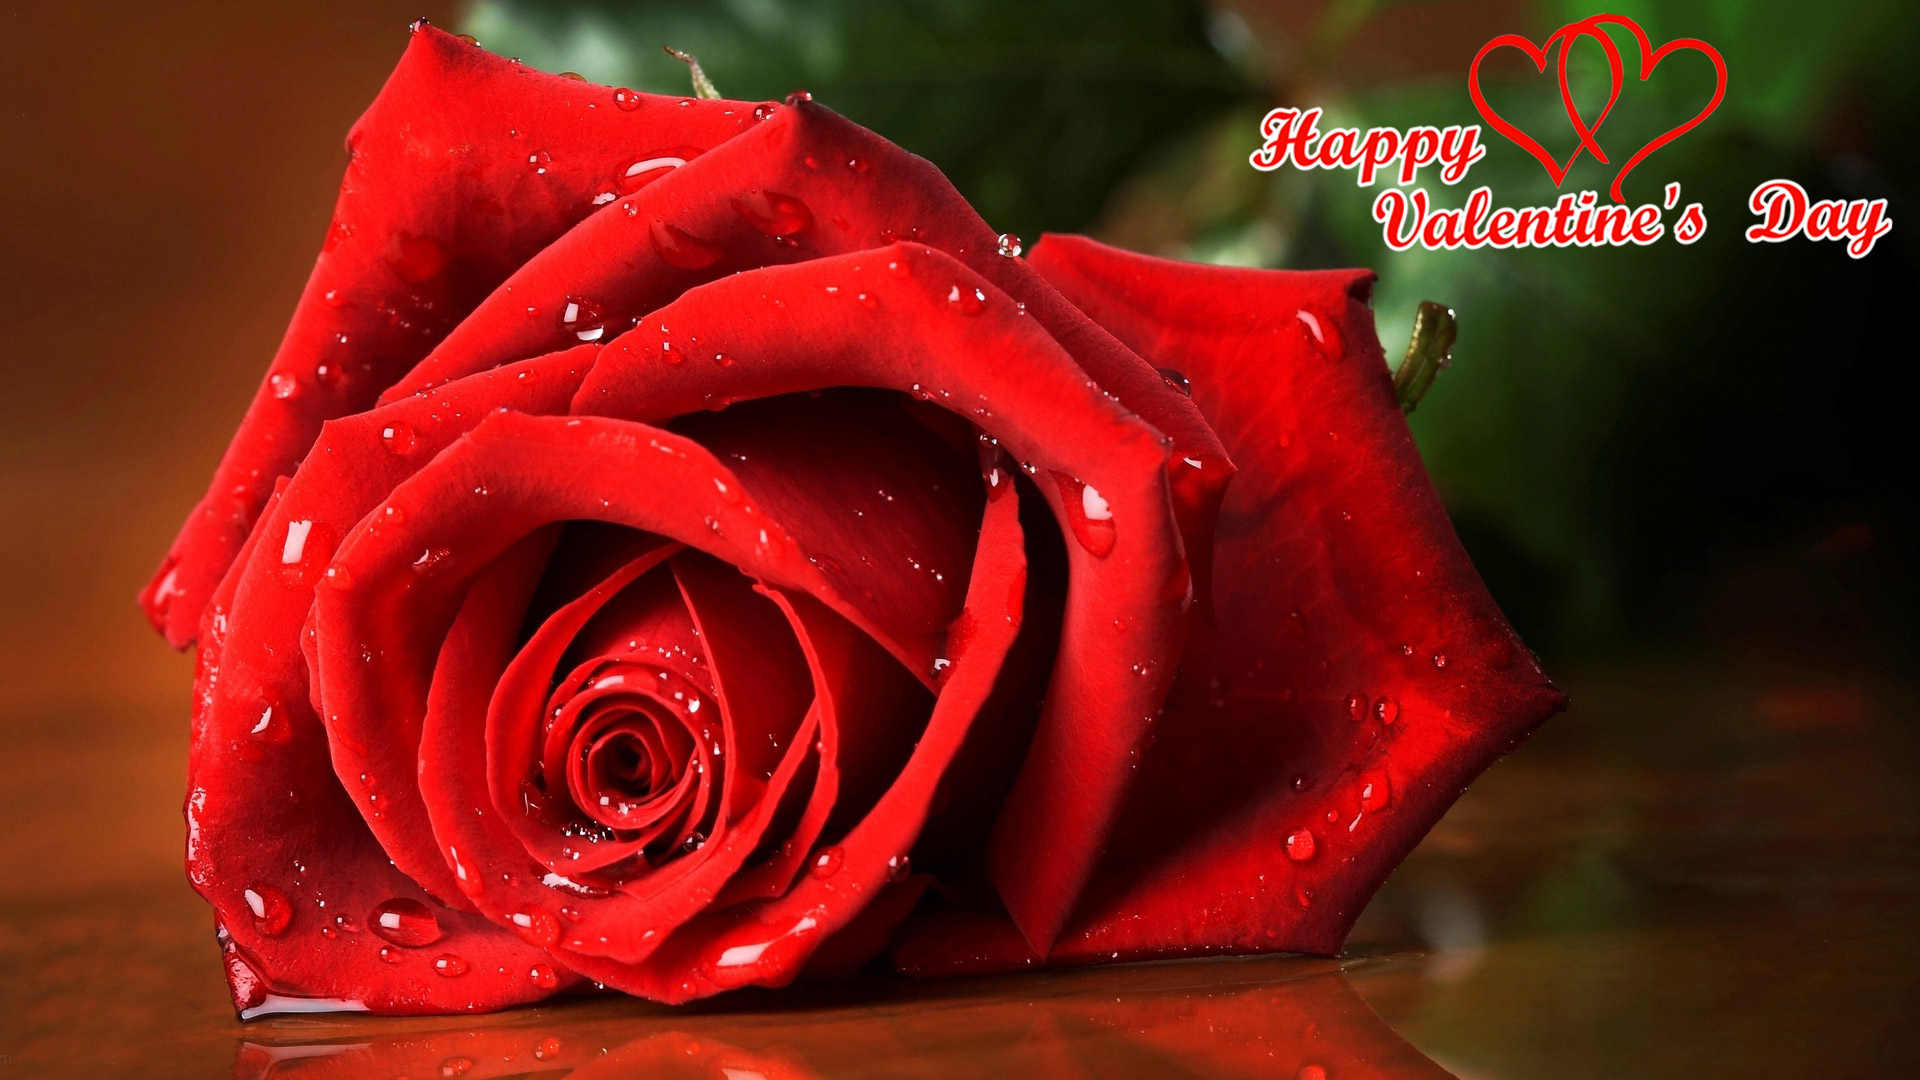 Top 25 Pictures Of Red Roses - #18 - for Valentines - HD Wallpapers ...